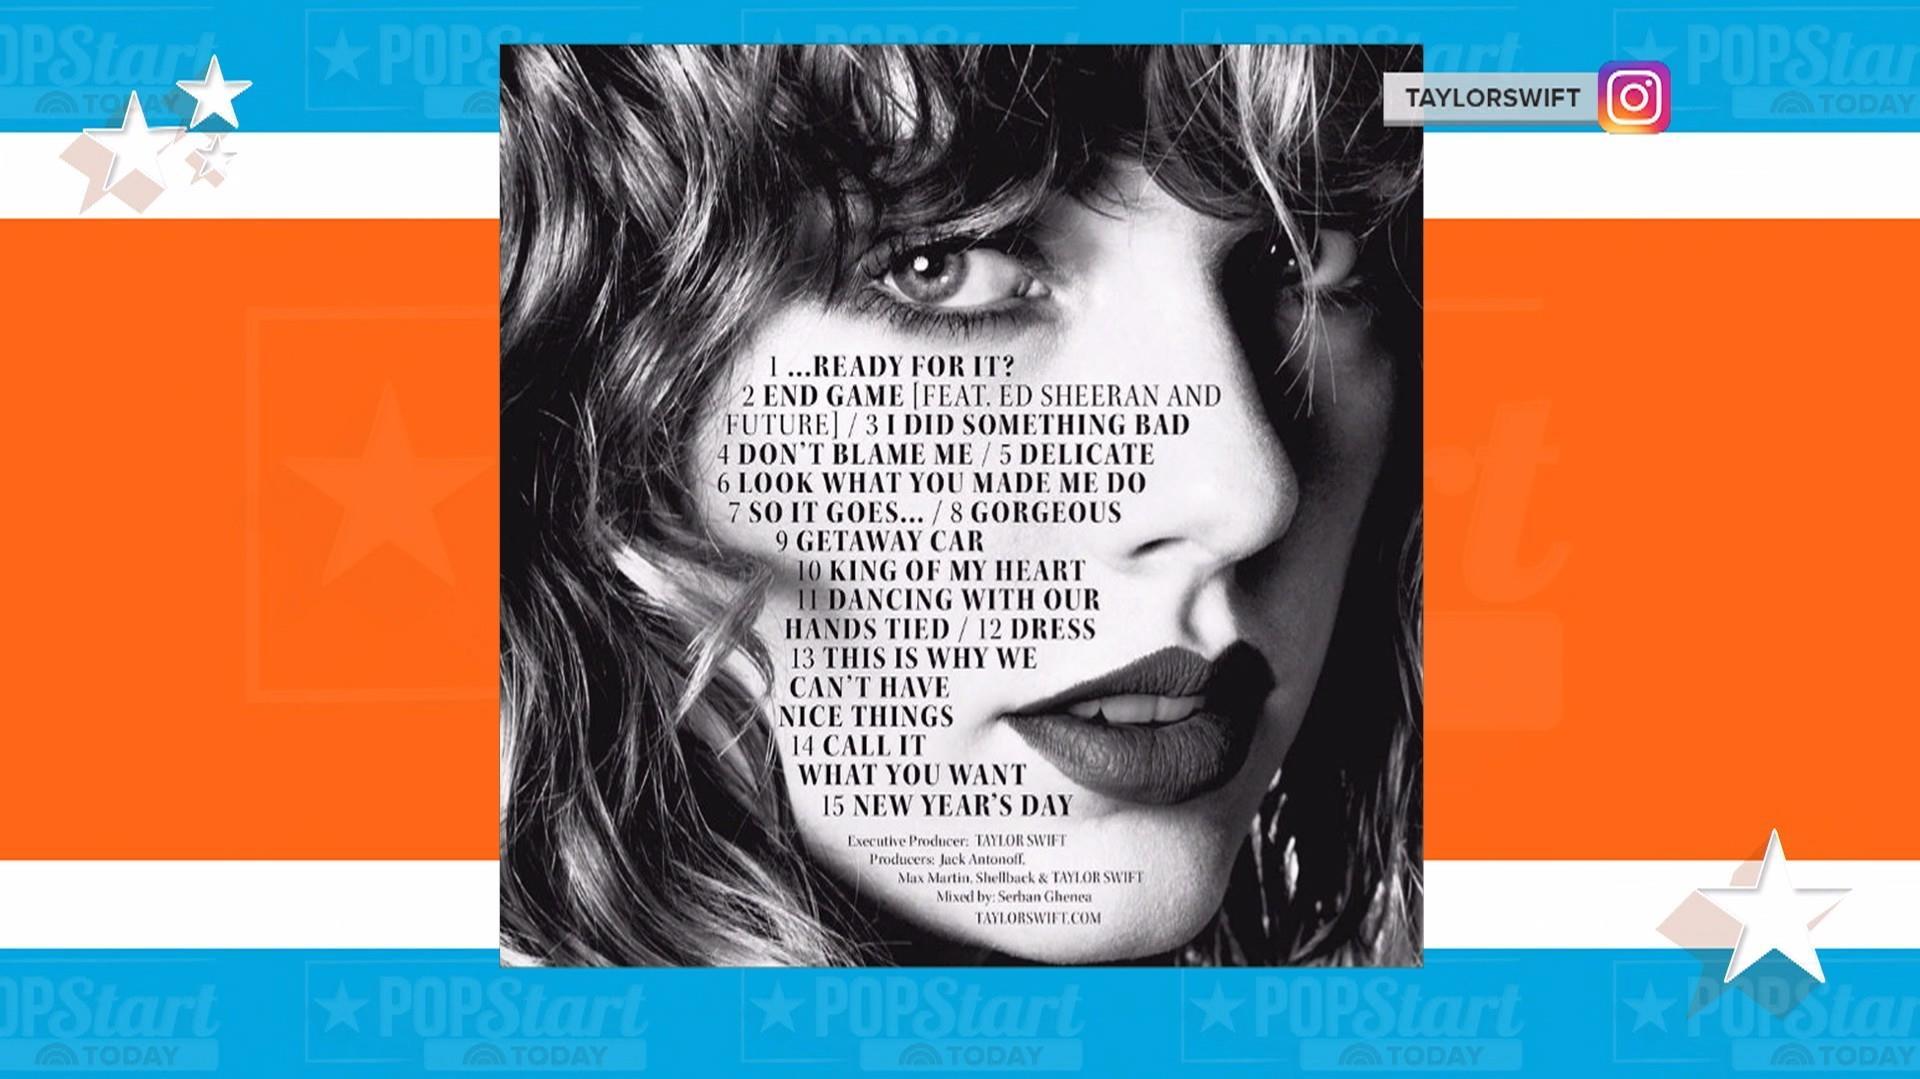 Taylor Swift Releases Track Listing Of Her New Album